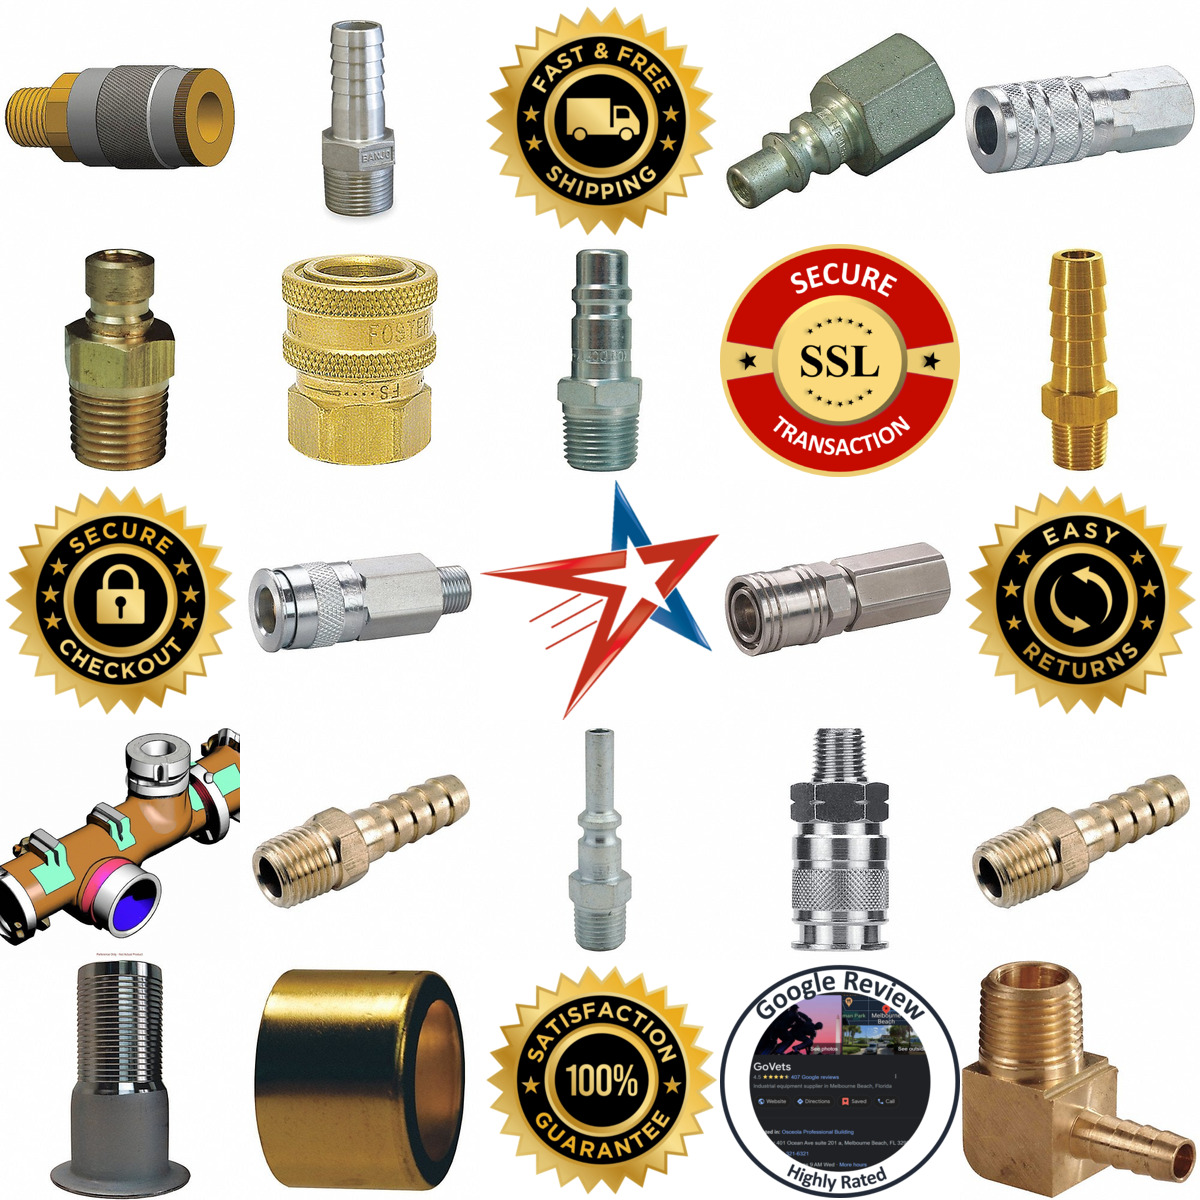 A selection of Pneumatic Hose Fittings and Couplings products on GoVets